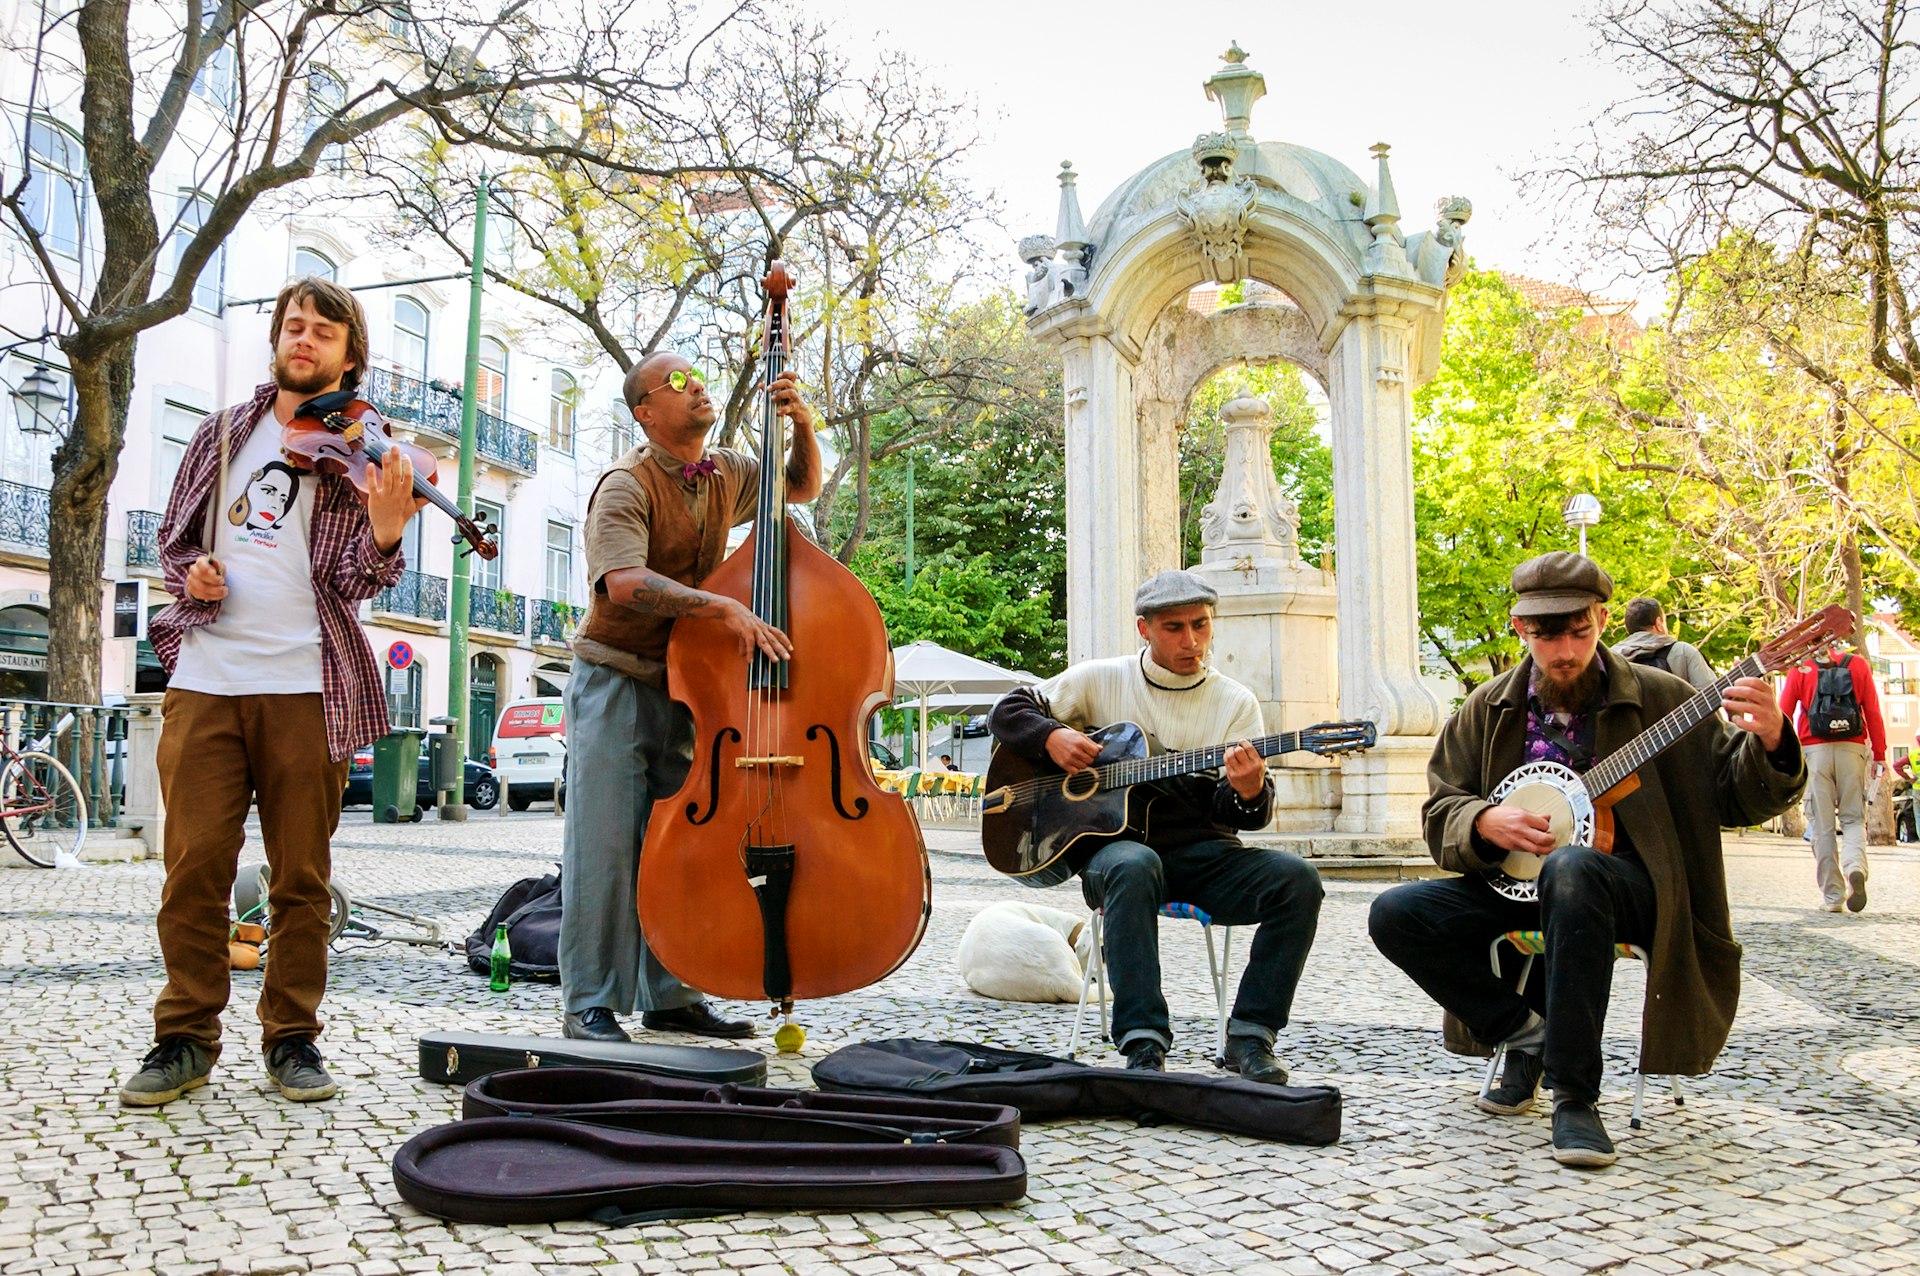 Four musicians play folk music on stringed instruments in a public square in Lisbon